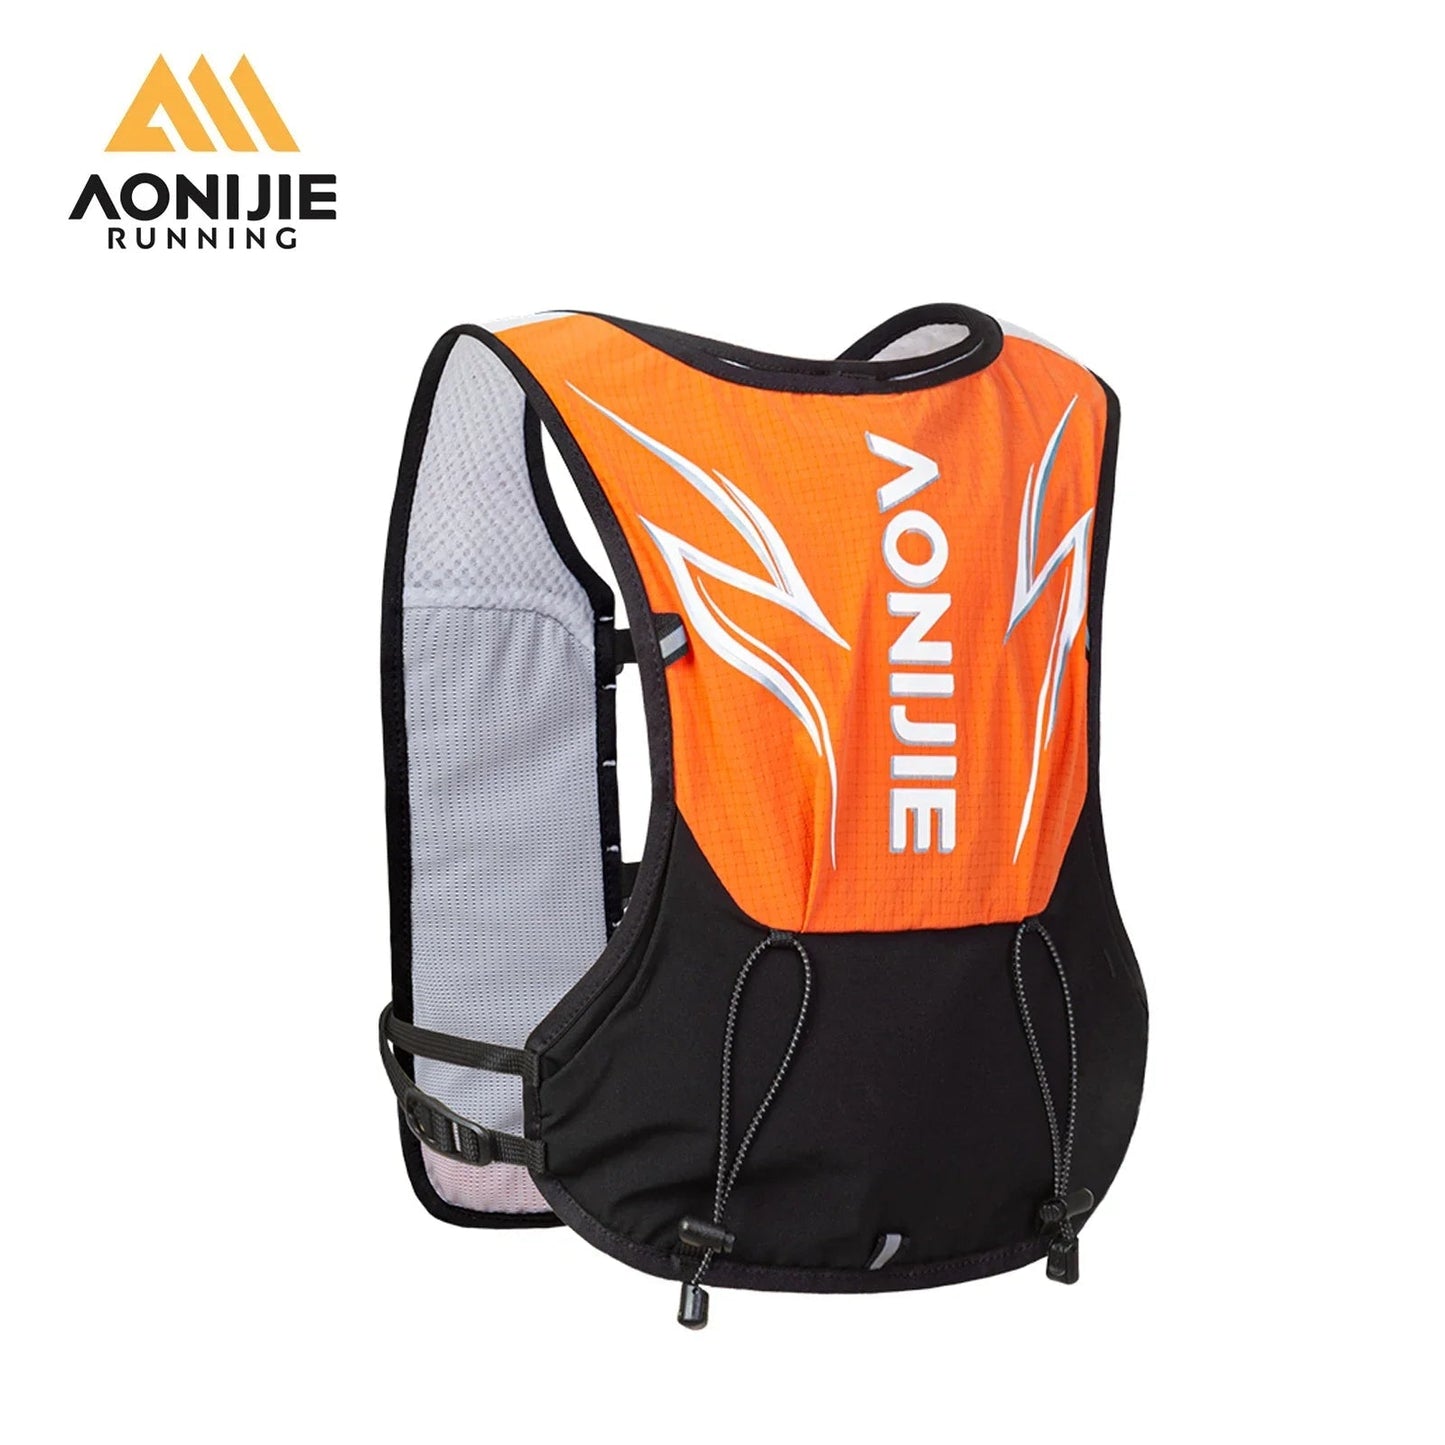 AONIJIE 5L Kids Hydration Backpack - Outdoor Adventures - C9120